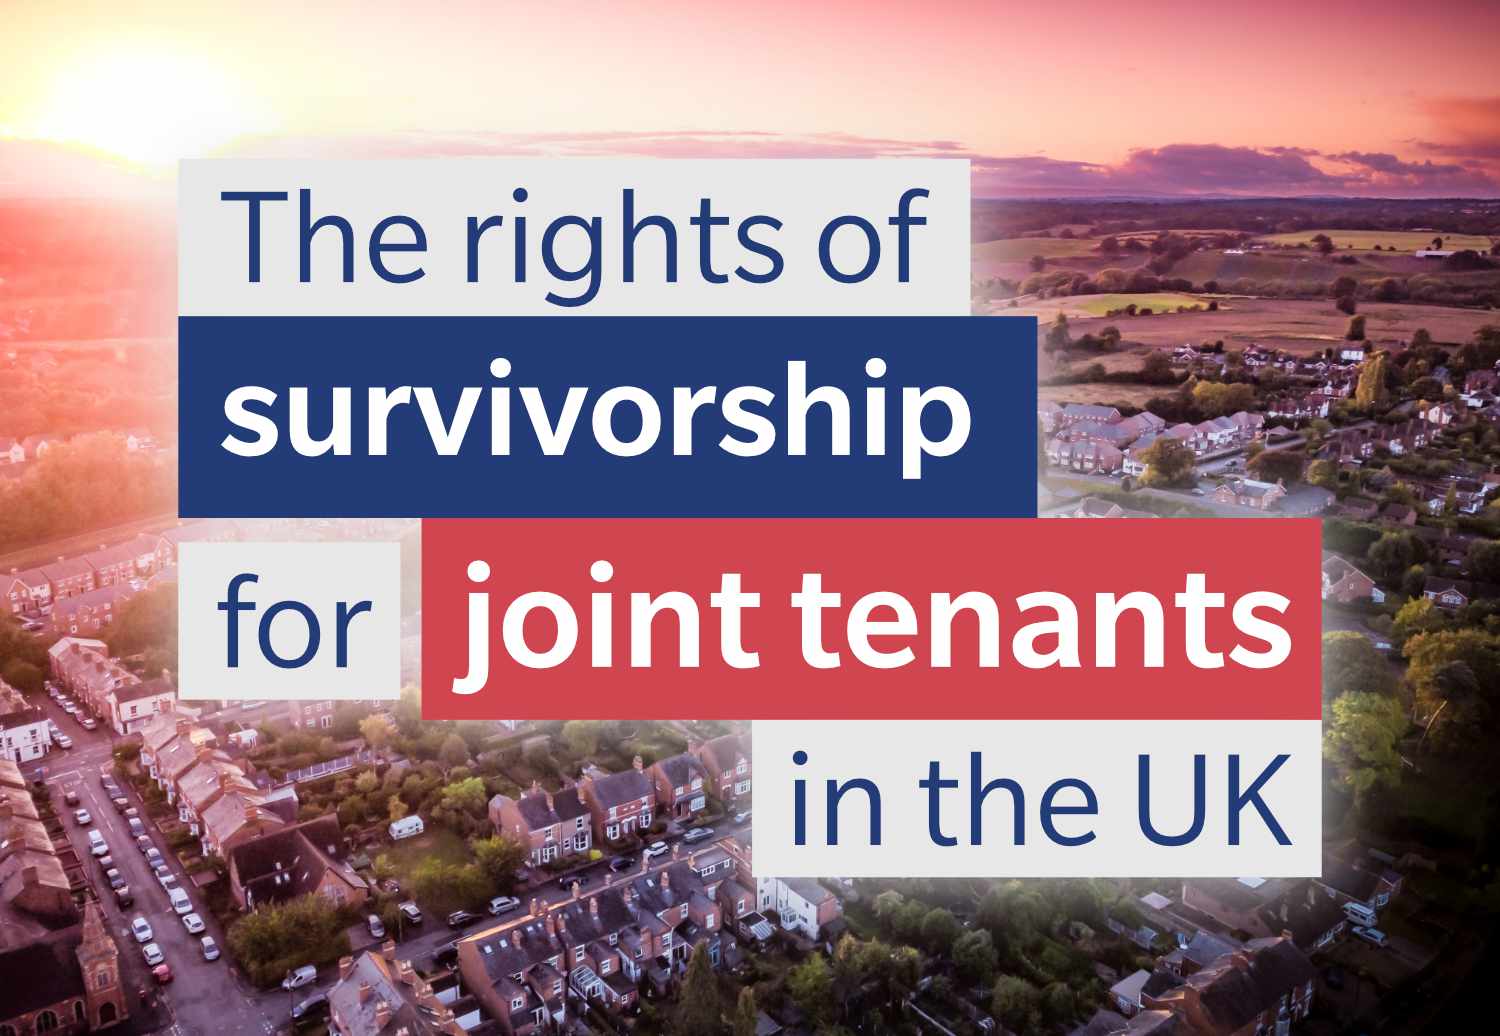 Text stating "The rights of survivorship for joint tenants in the UK" overlaid on an aerial view of a quaint UK village at sunset.